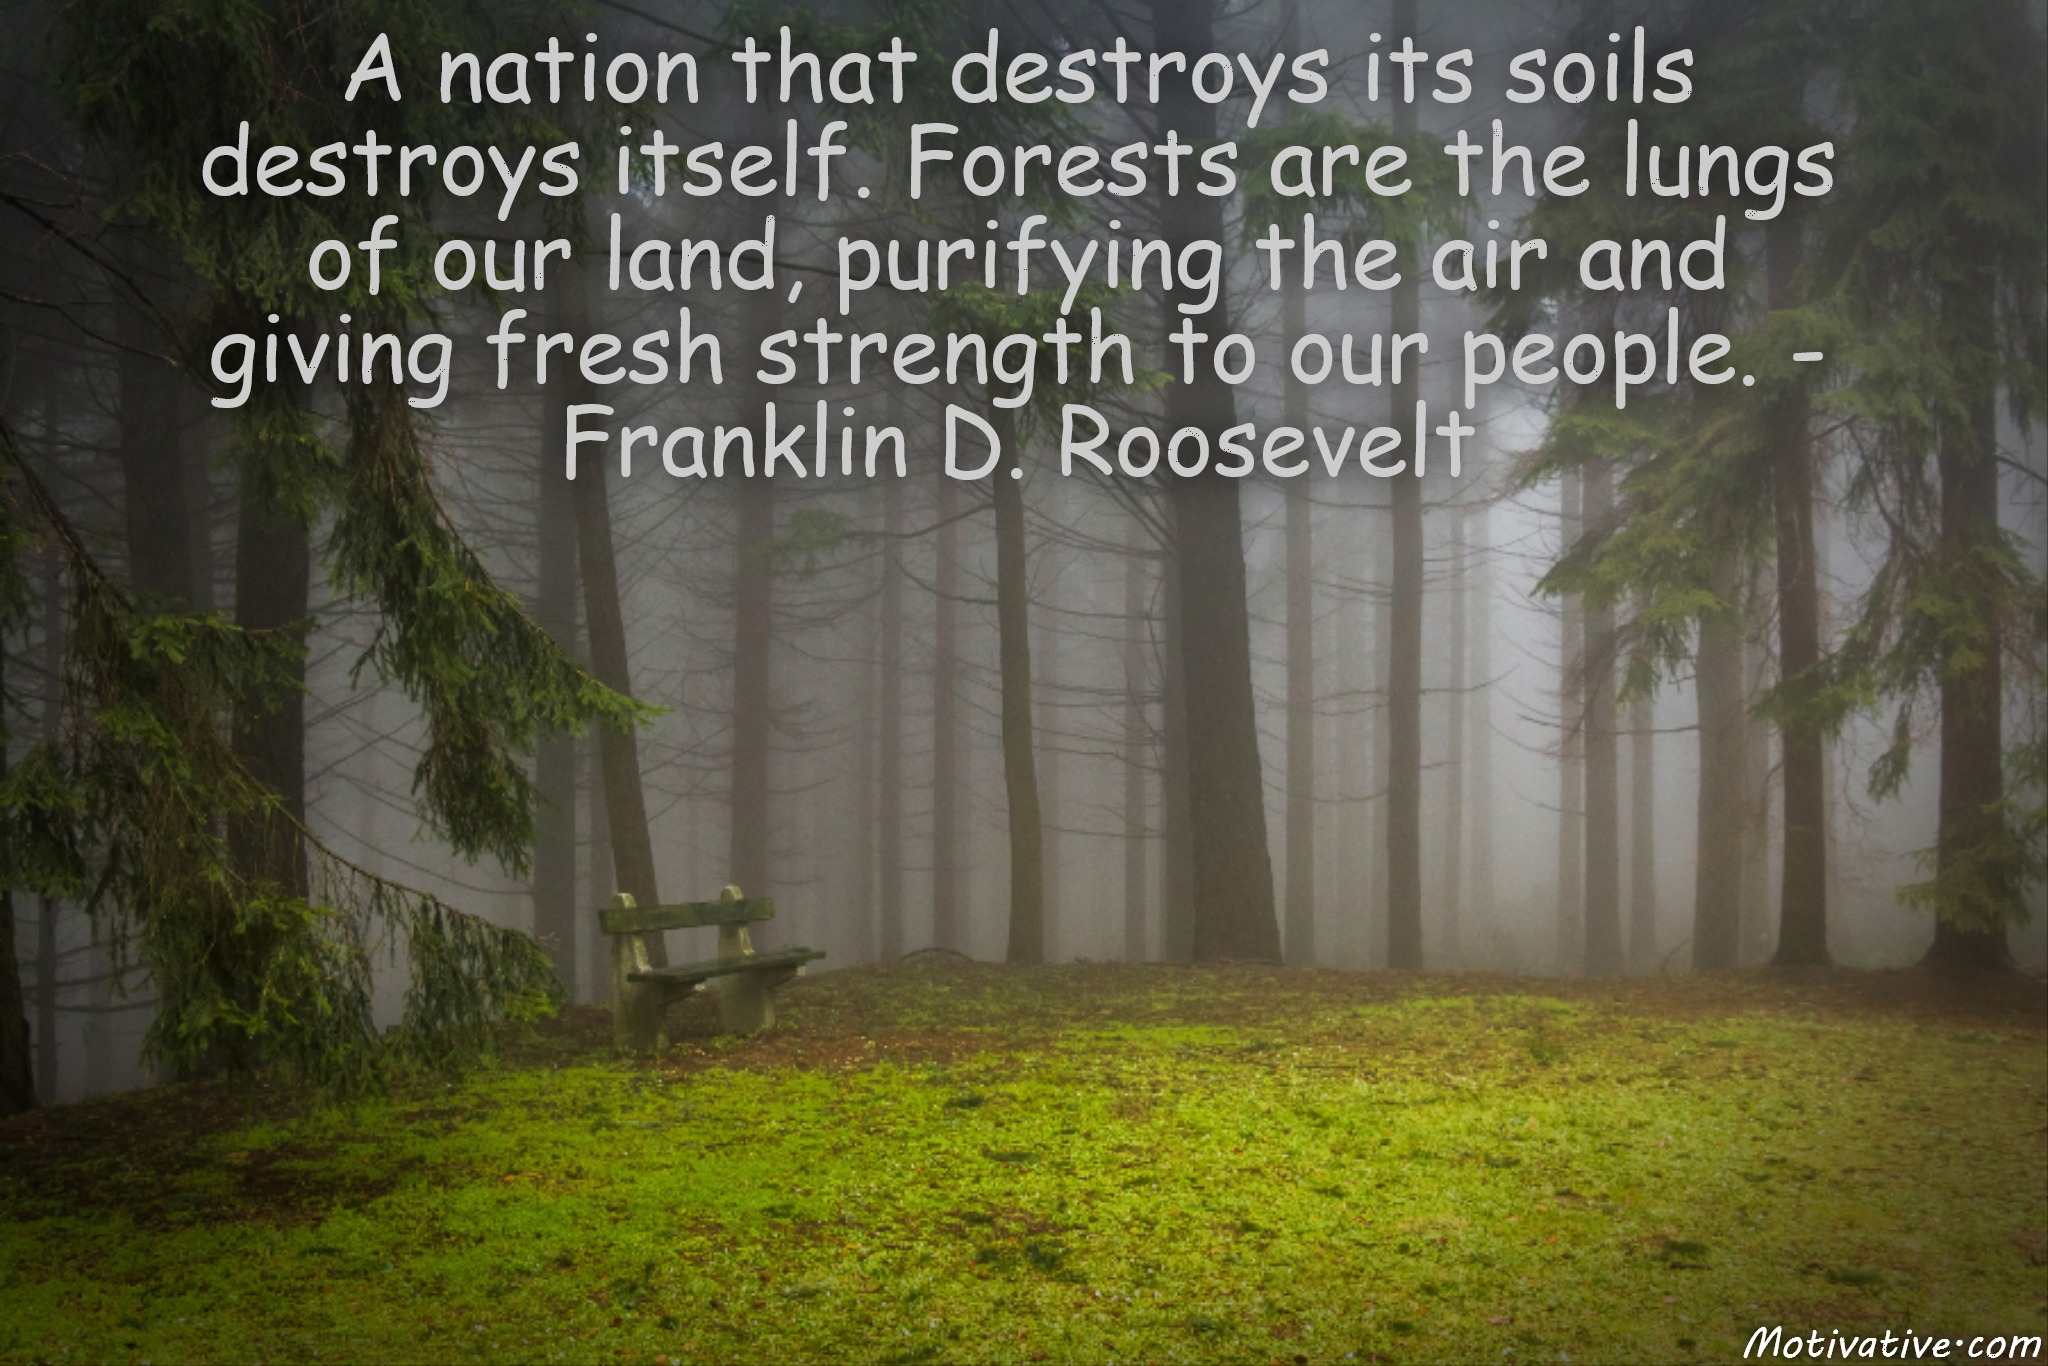 A nation that destroys its soils destroys itself. Forests are the lungs of our land, purifying the air and giving fresh strength to our people. – Franklin D. Roosevelt